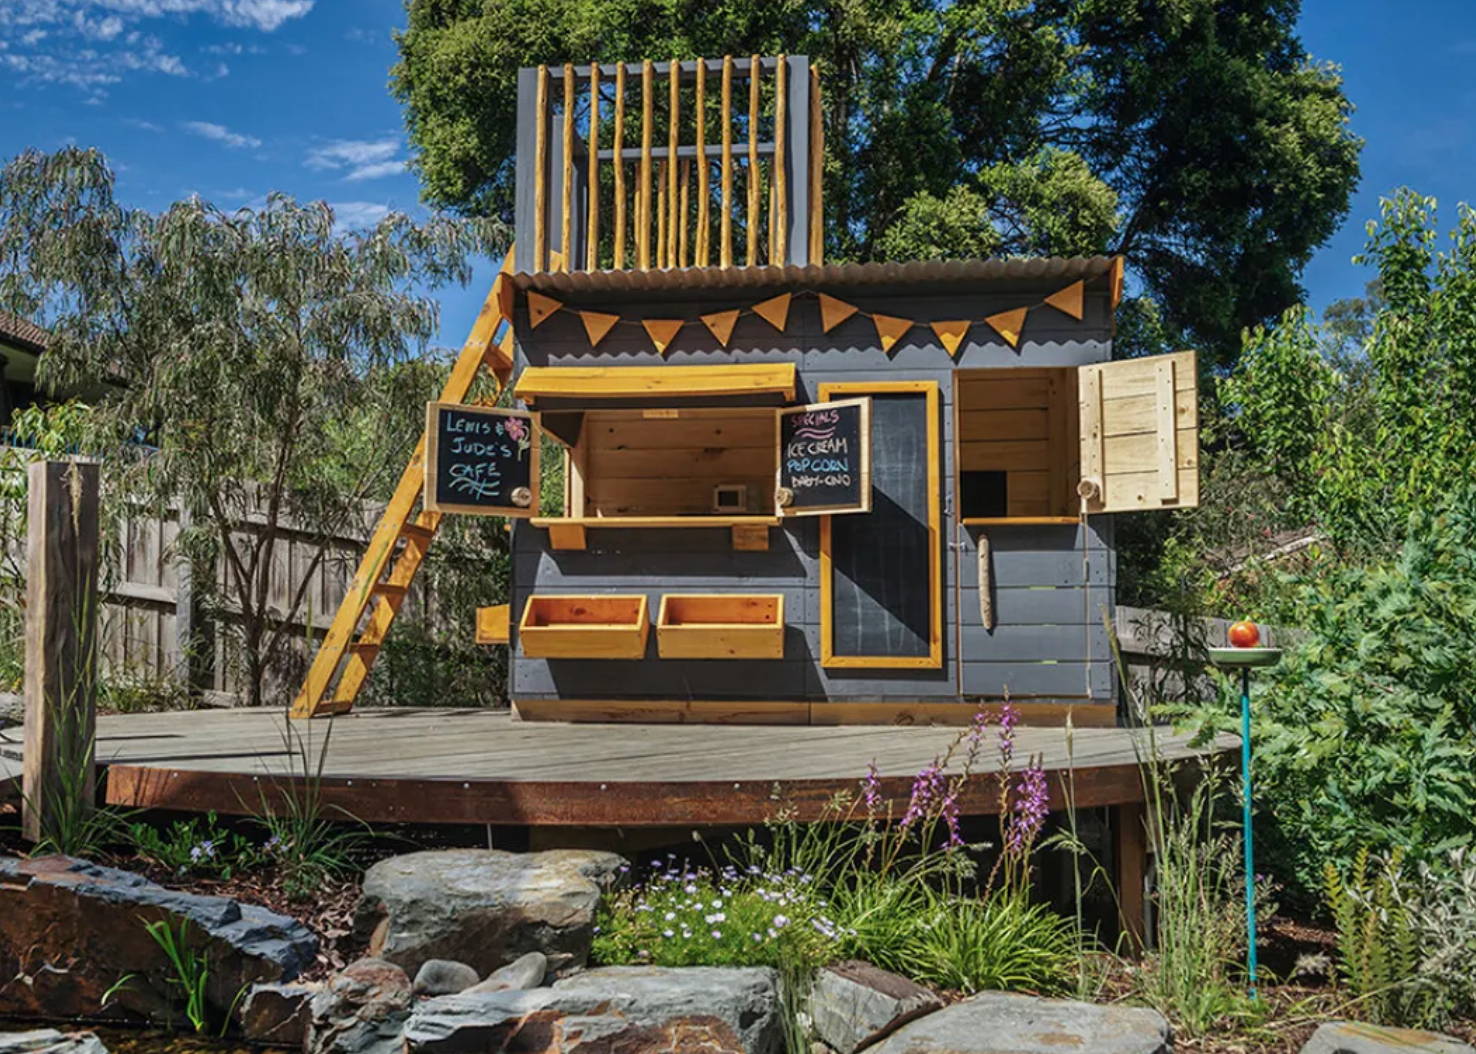 A fort top style of cubby house